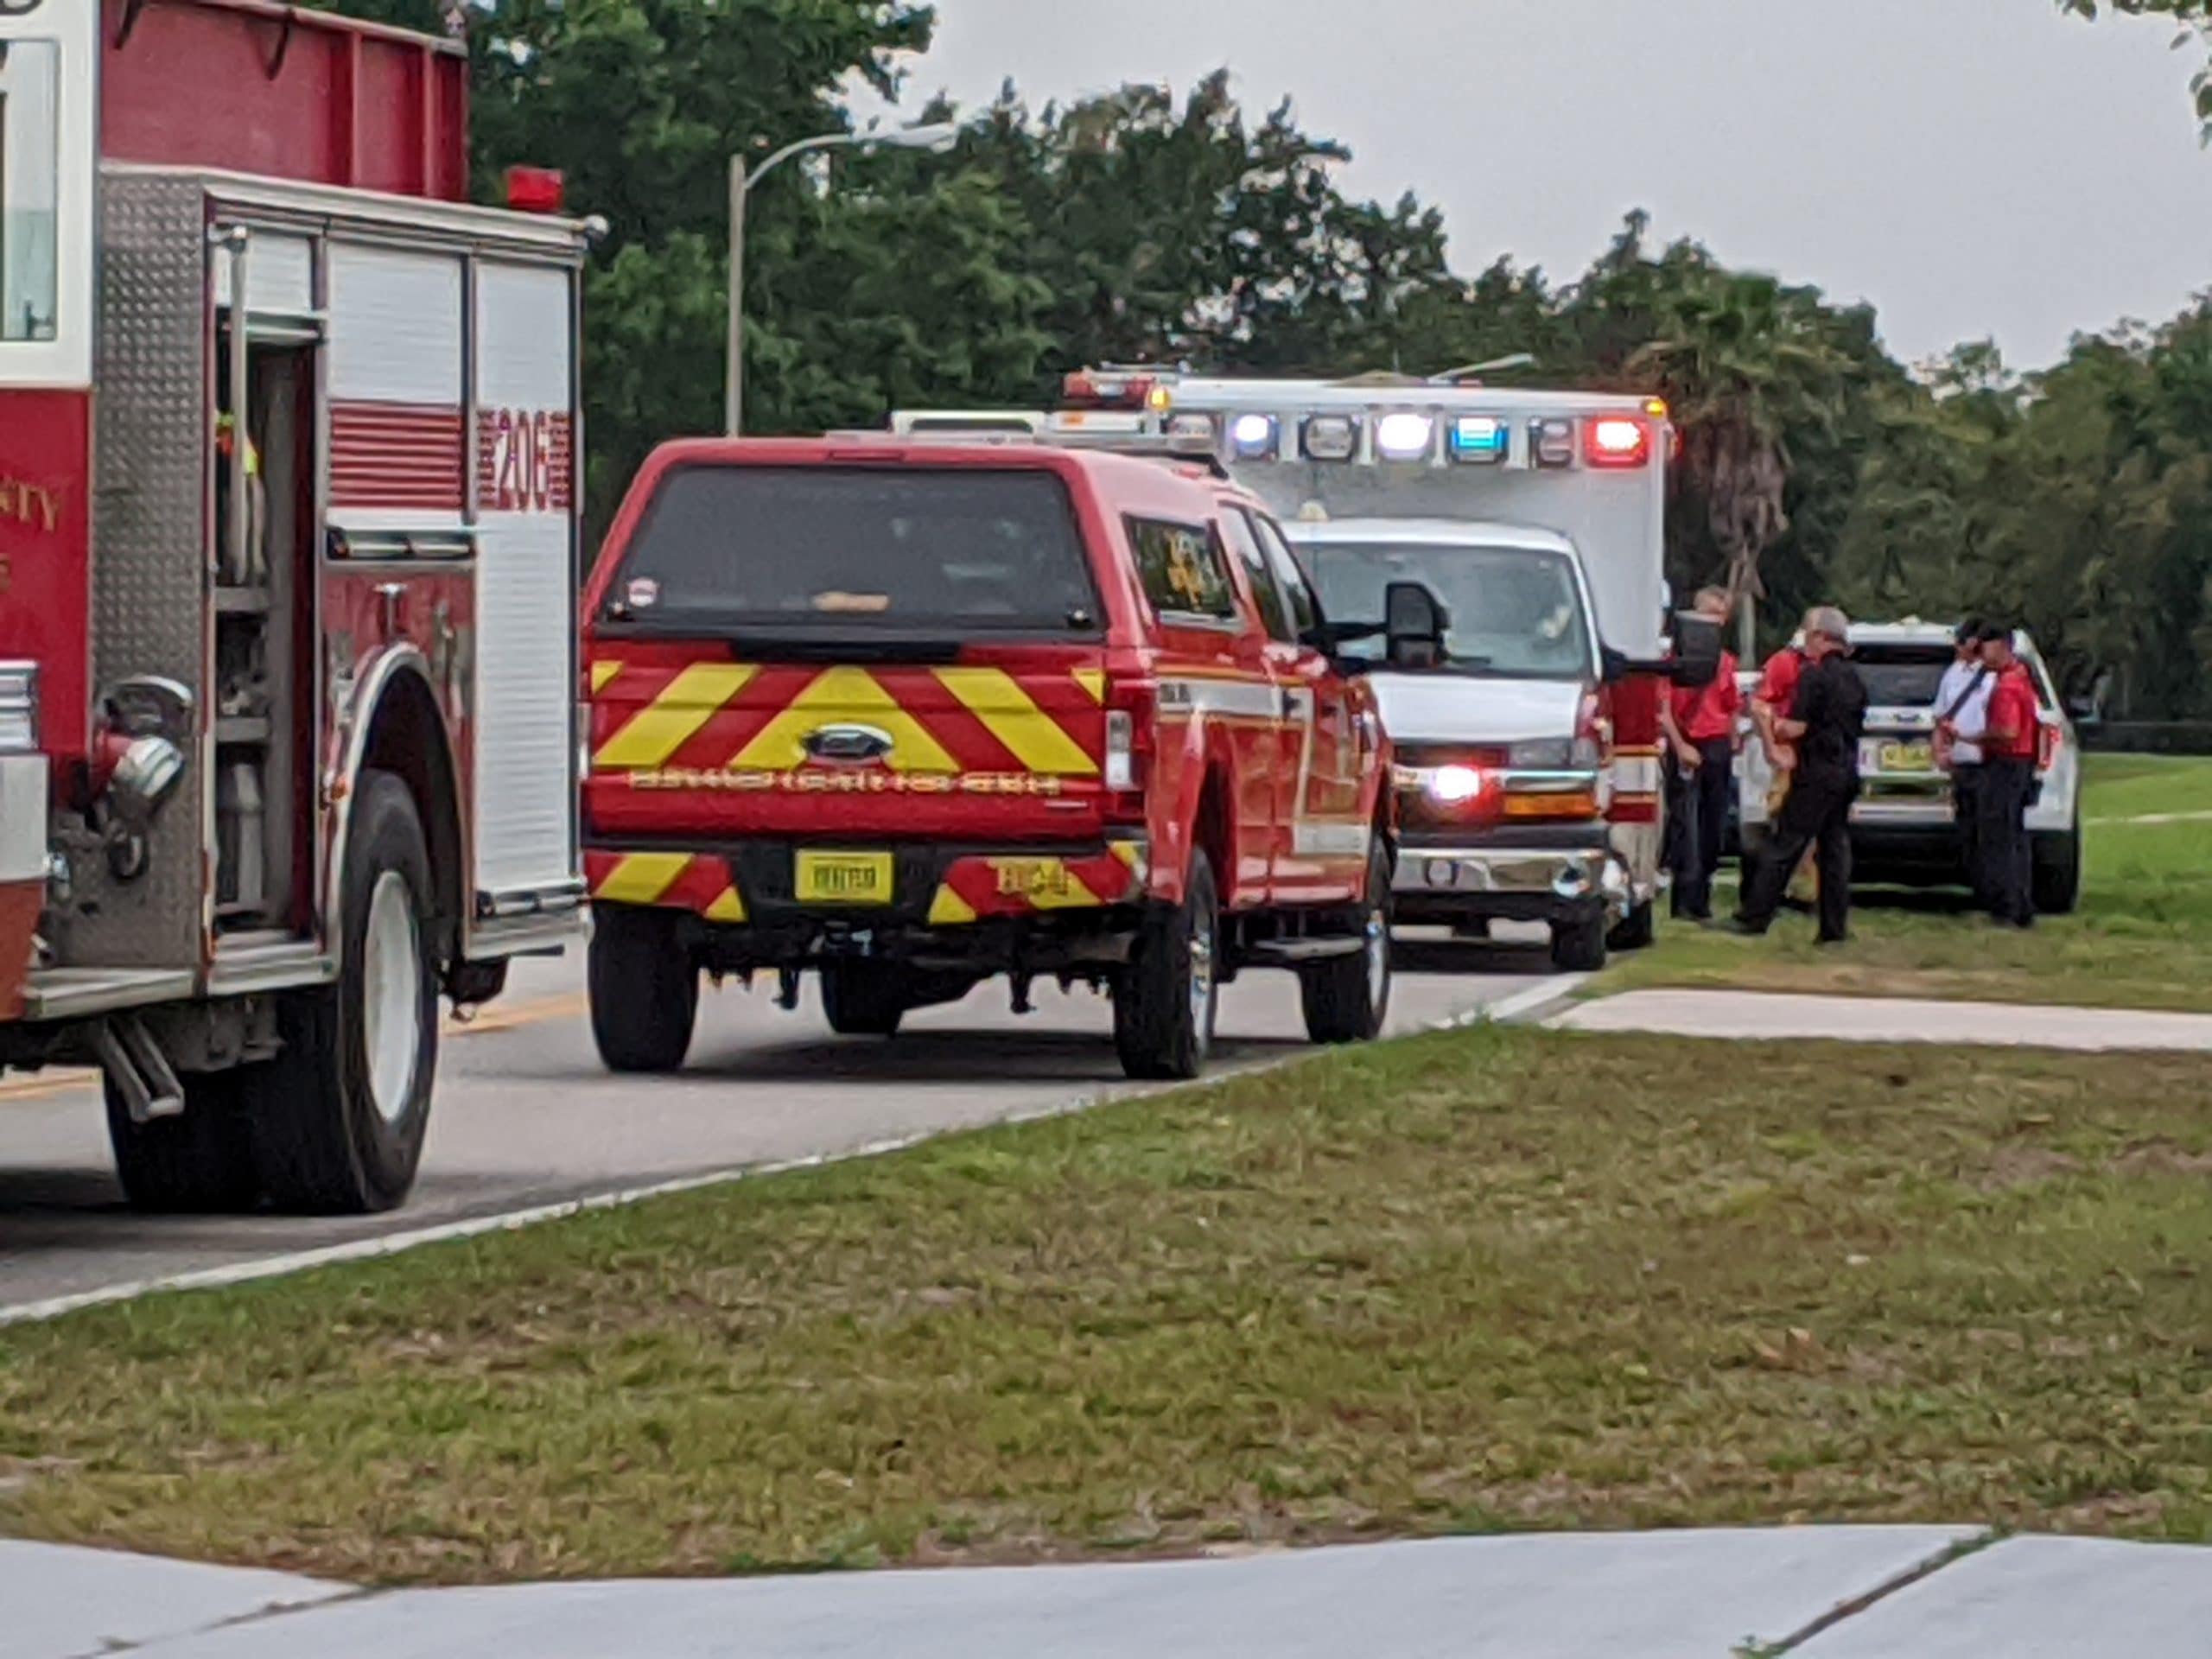 HCFR responded to the scene with 3 engine companies, 3 rescue, a Battalion Chief and the Deputy Chief of Operations for a total of 15 personnel on scene